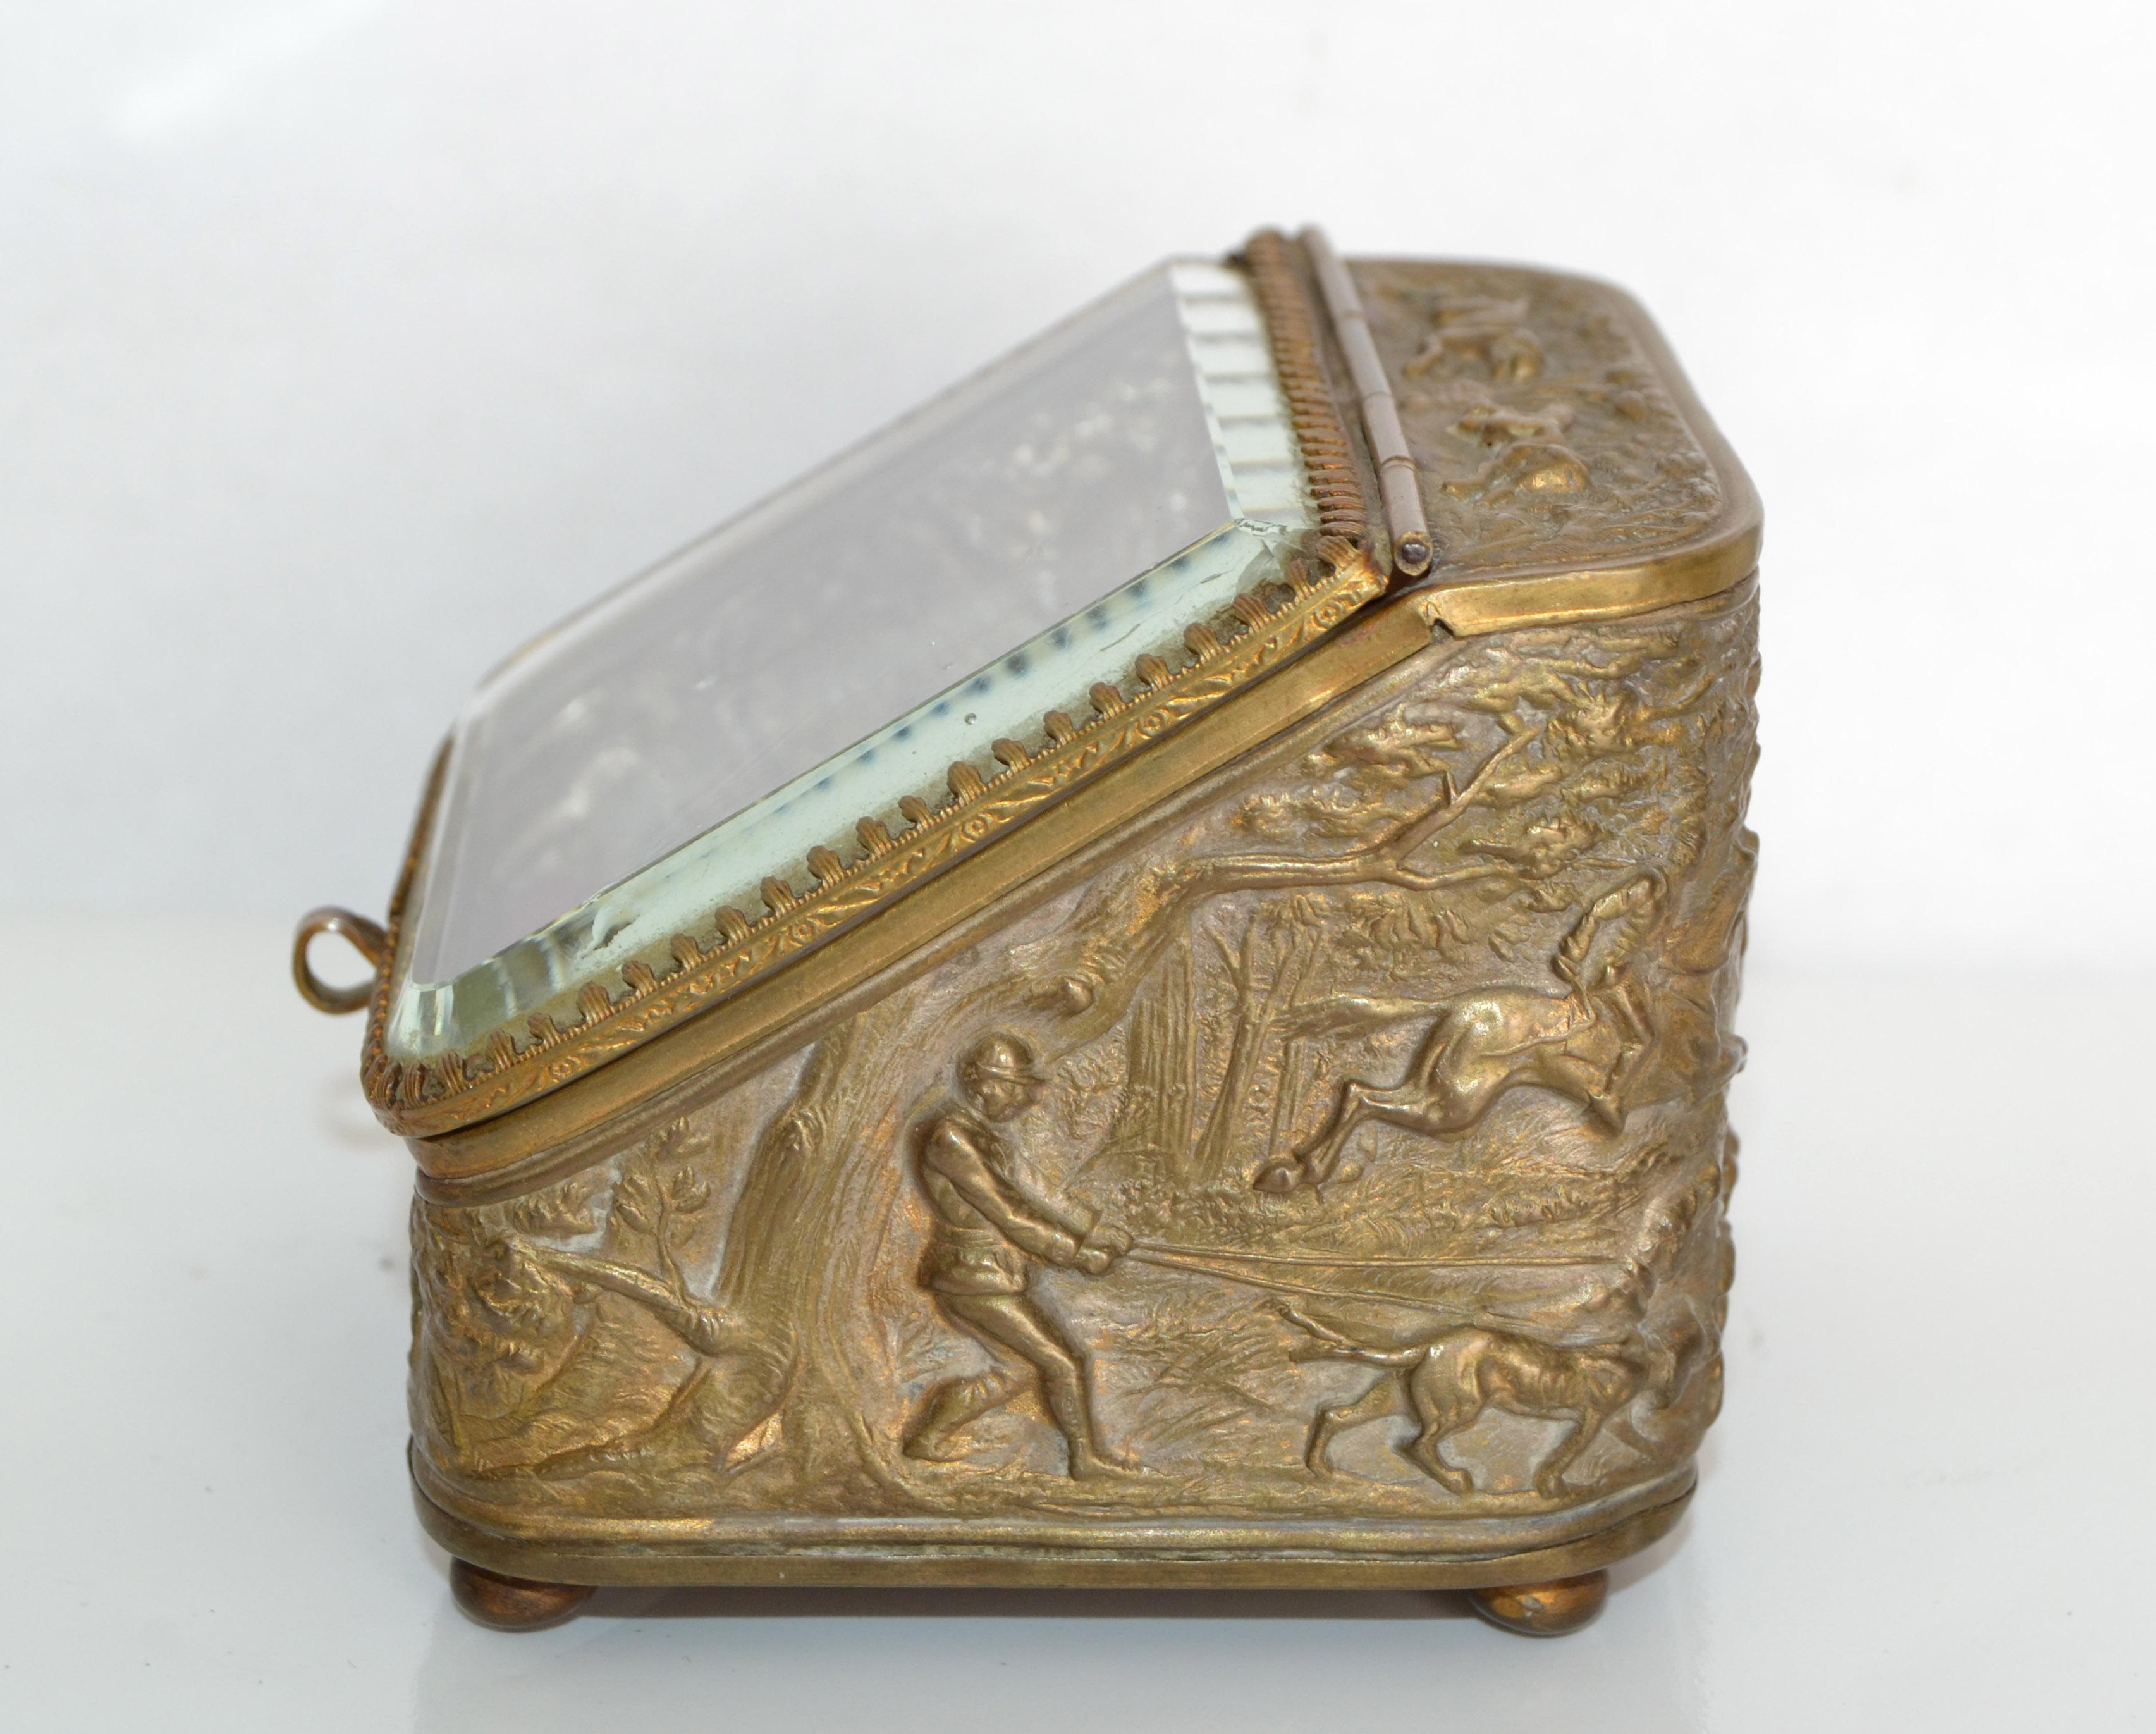 Patinated Antique French Napoleon III Era Pocket Watch Display Casket Box Hunt Theme Boar For Sale